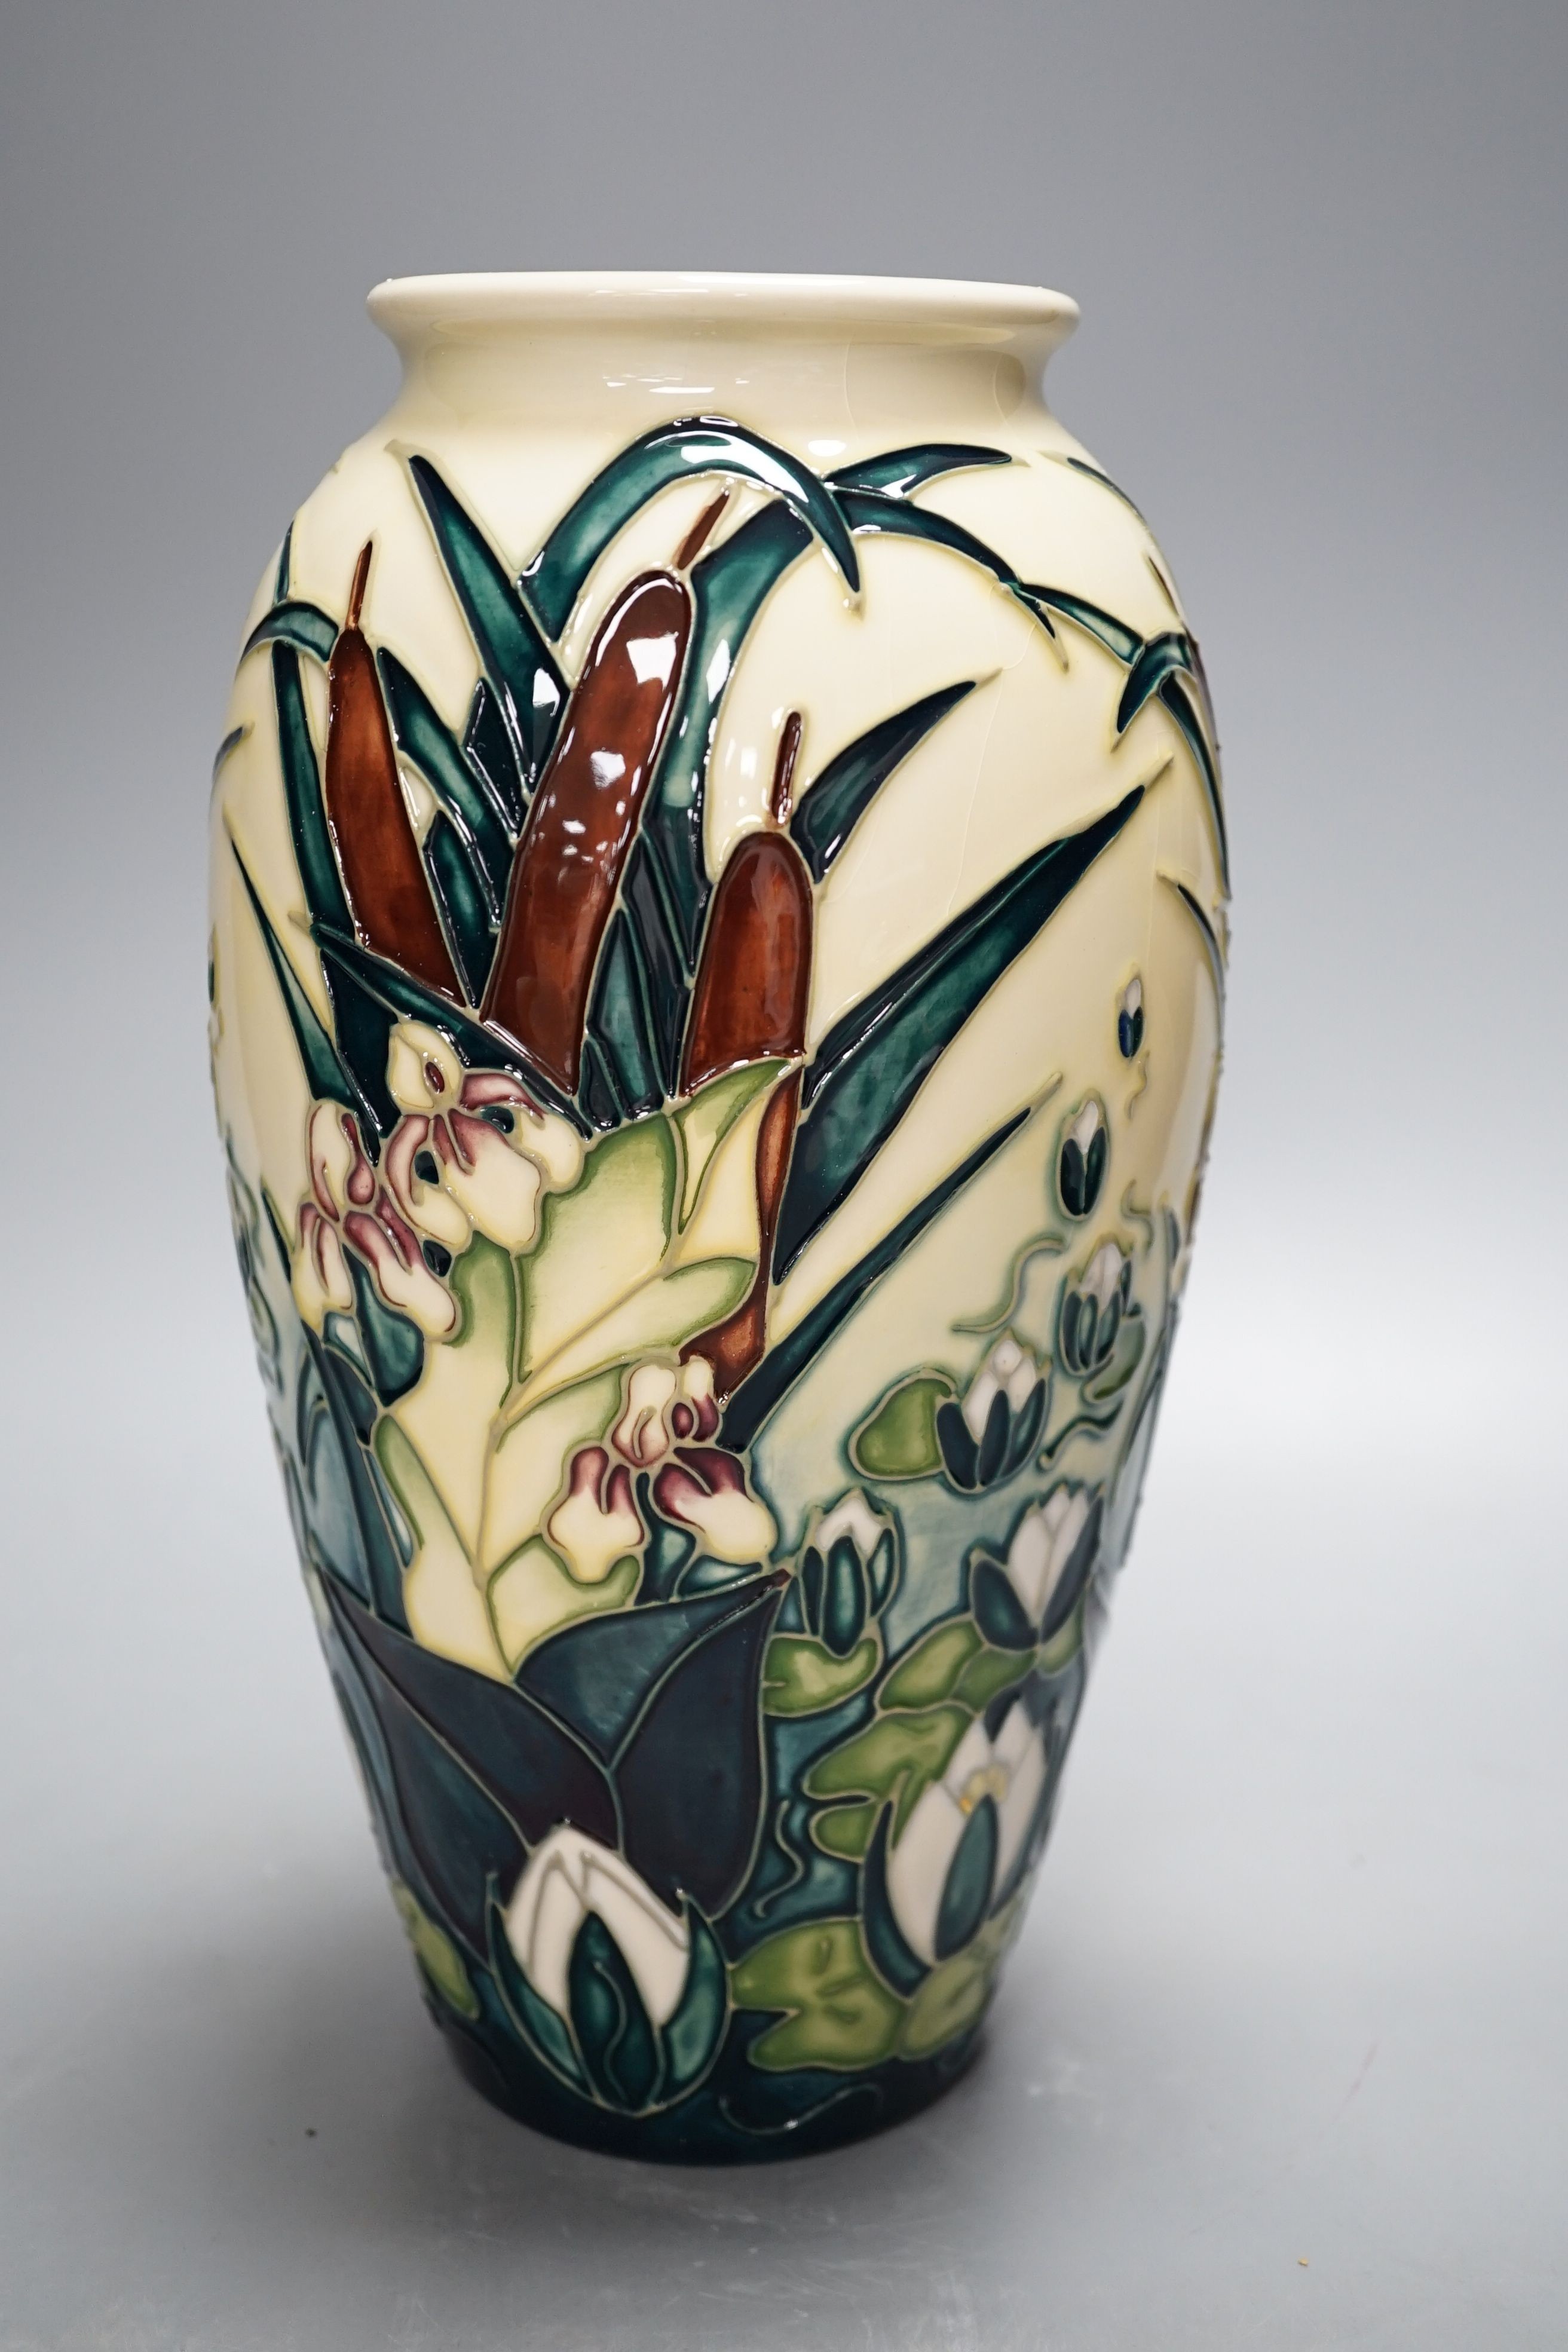 A Moorcroft Lamia pattern ovoid vase, dated 1995, signed Beverley Wilkes, 1998, 26cm., in original box